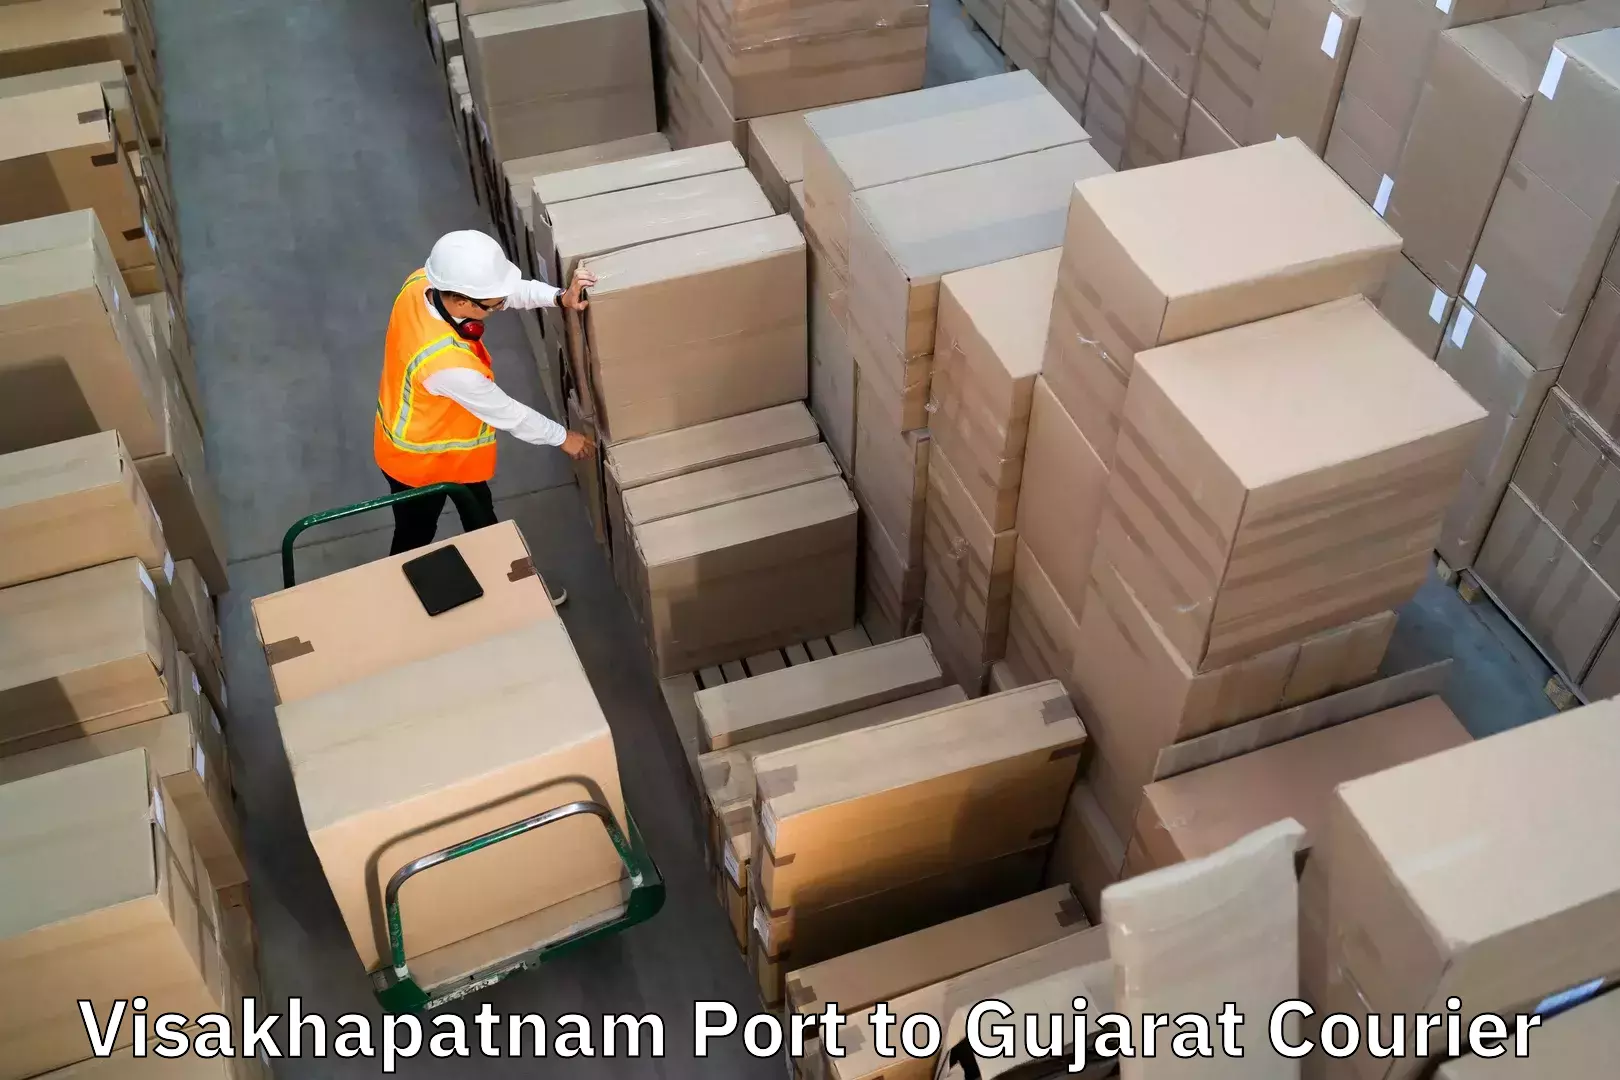 Luggage delivery app Visakhapatnam Port to Panchmahal